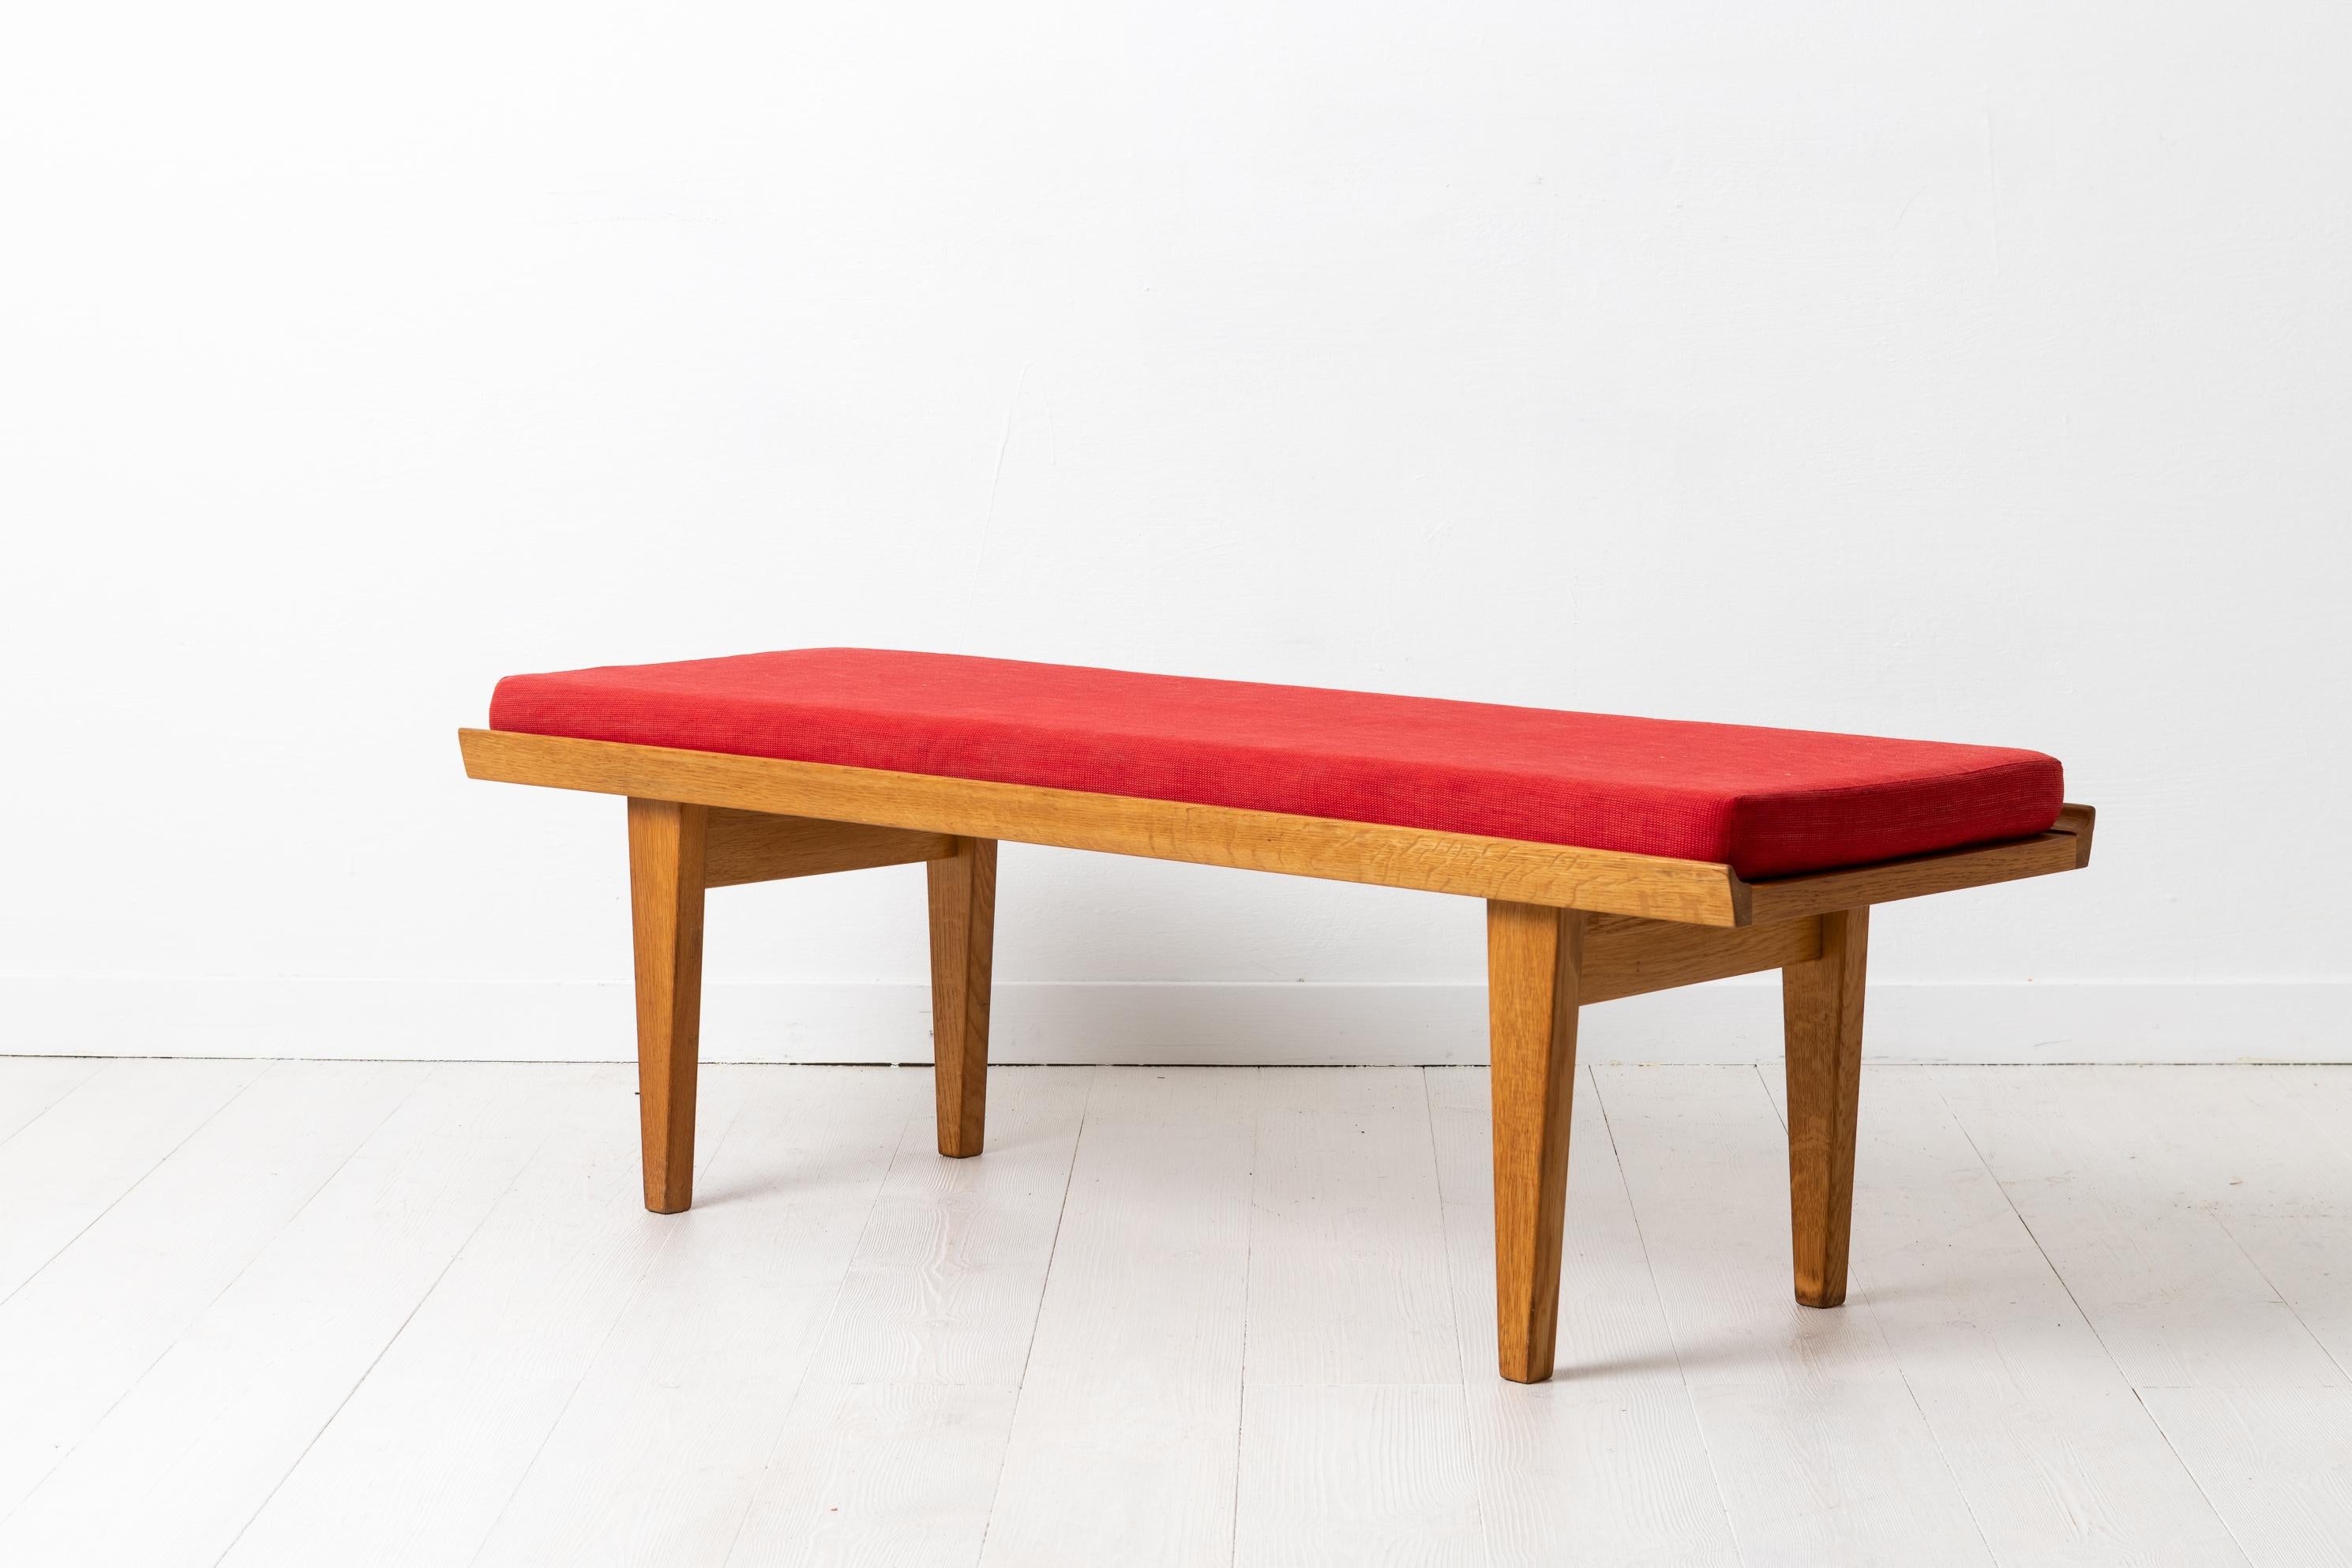 Scandinavian Modern bench by Børge Mogensen for Karl Andersson & Söner from the 1960s. The bench is made in light oak with a detached cushion with red upholstery. The bench is in good vintage condition consistent with age and use. The cushion is 5